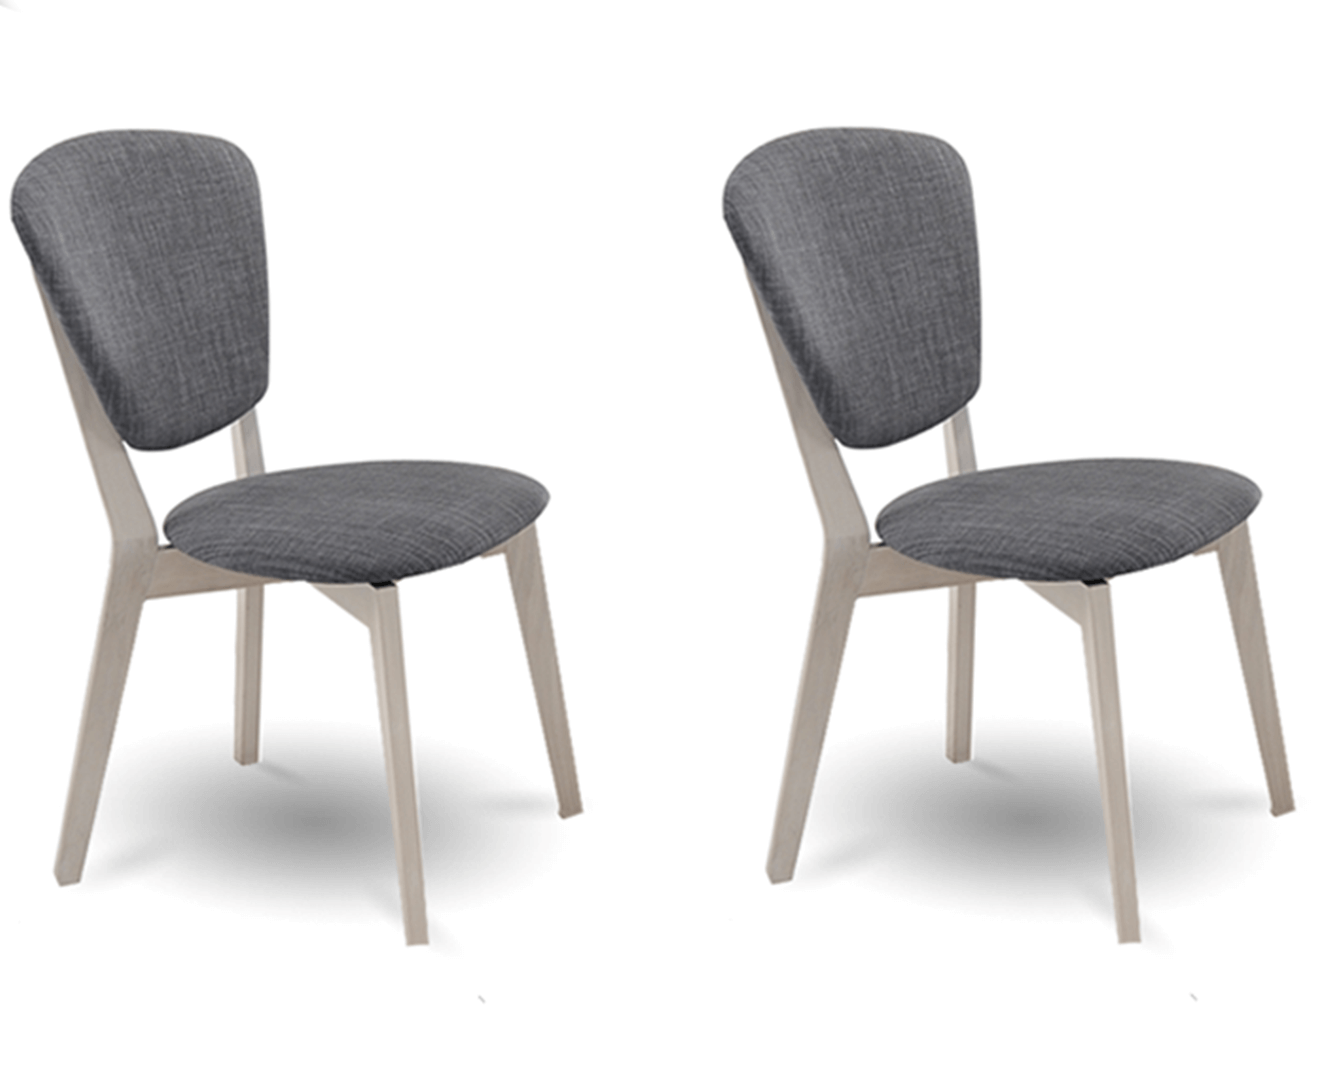 Set of 2 Dining Chair Solid hardwood White Wash-Upinteriors